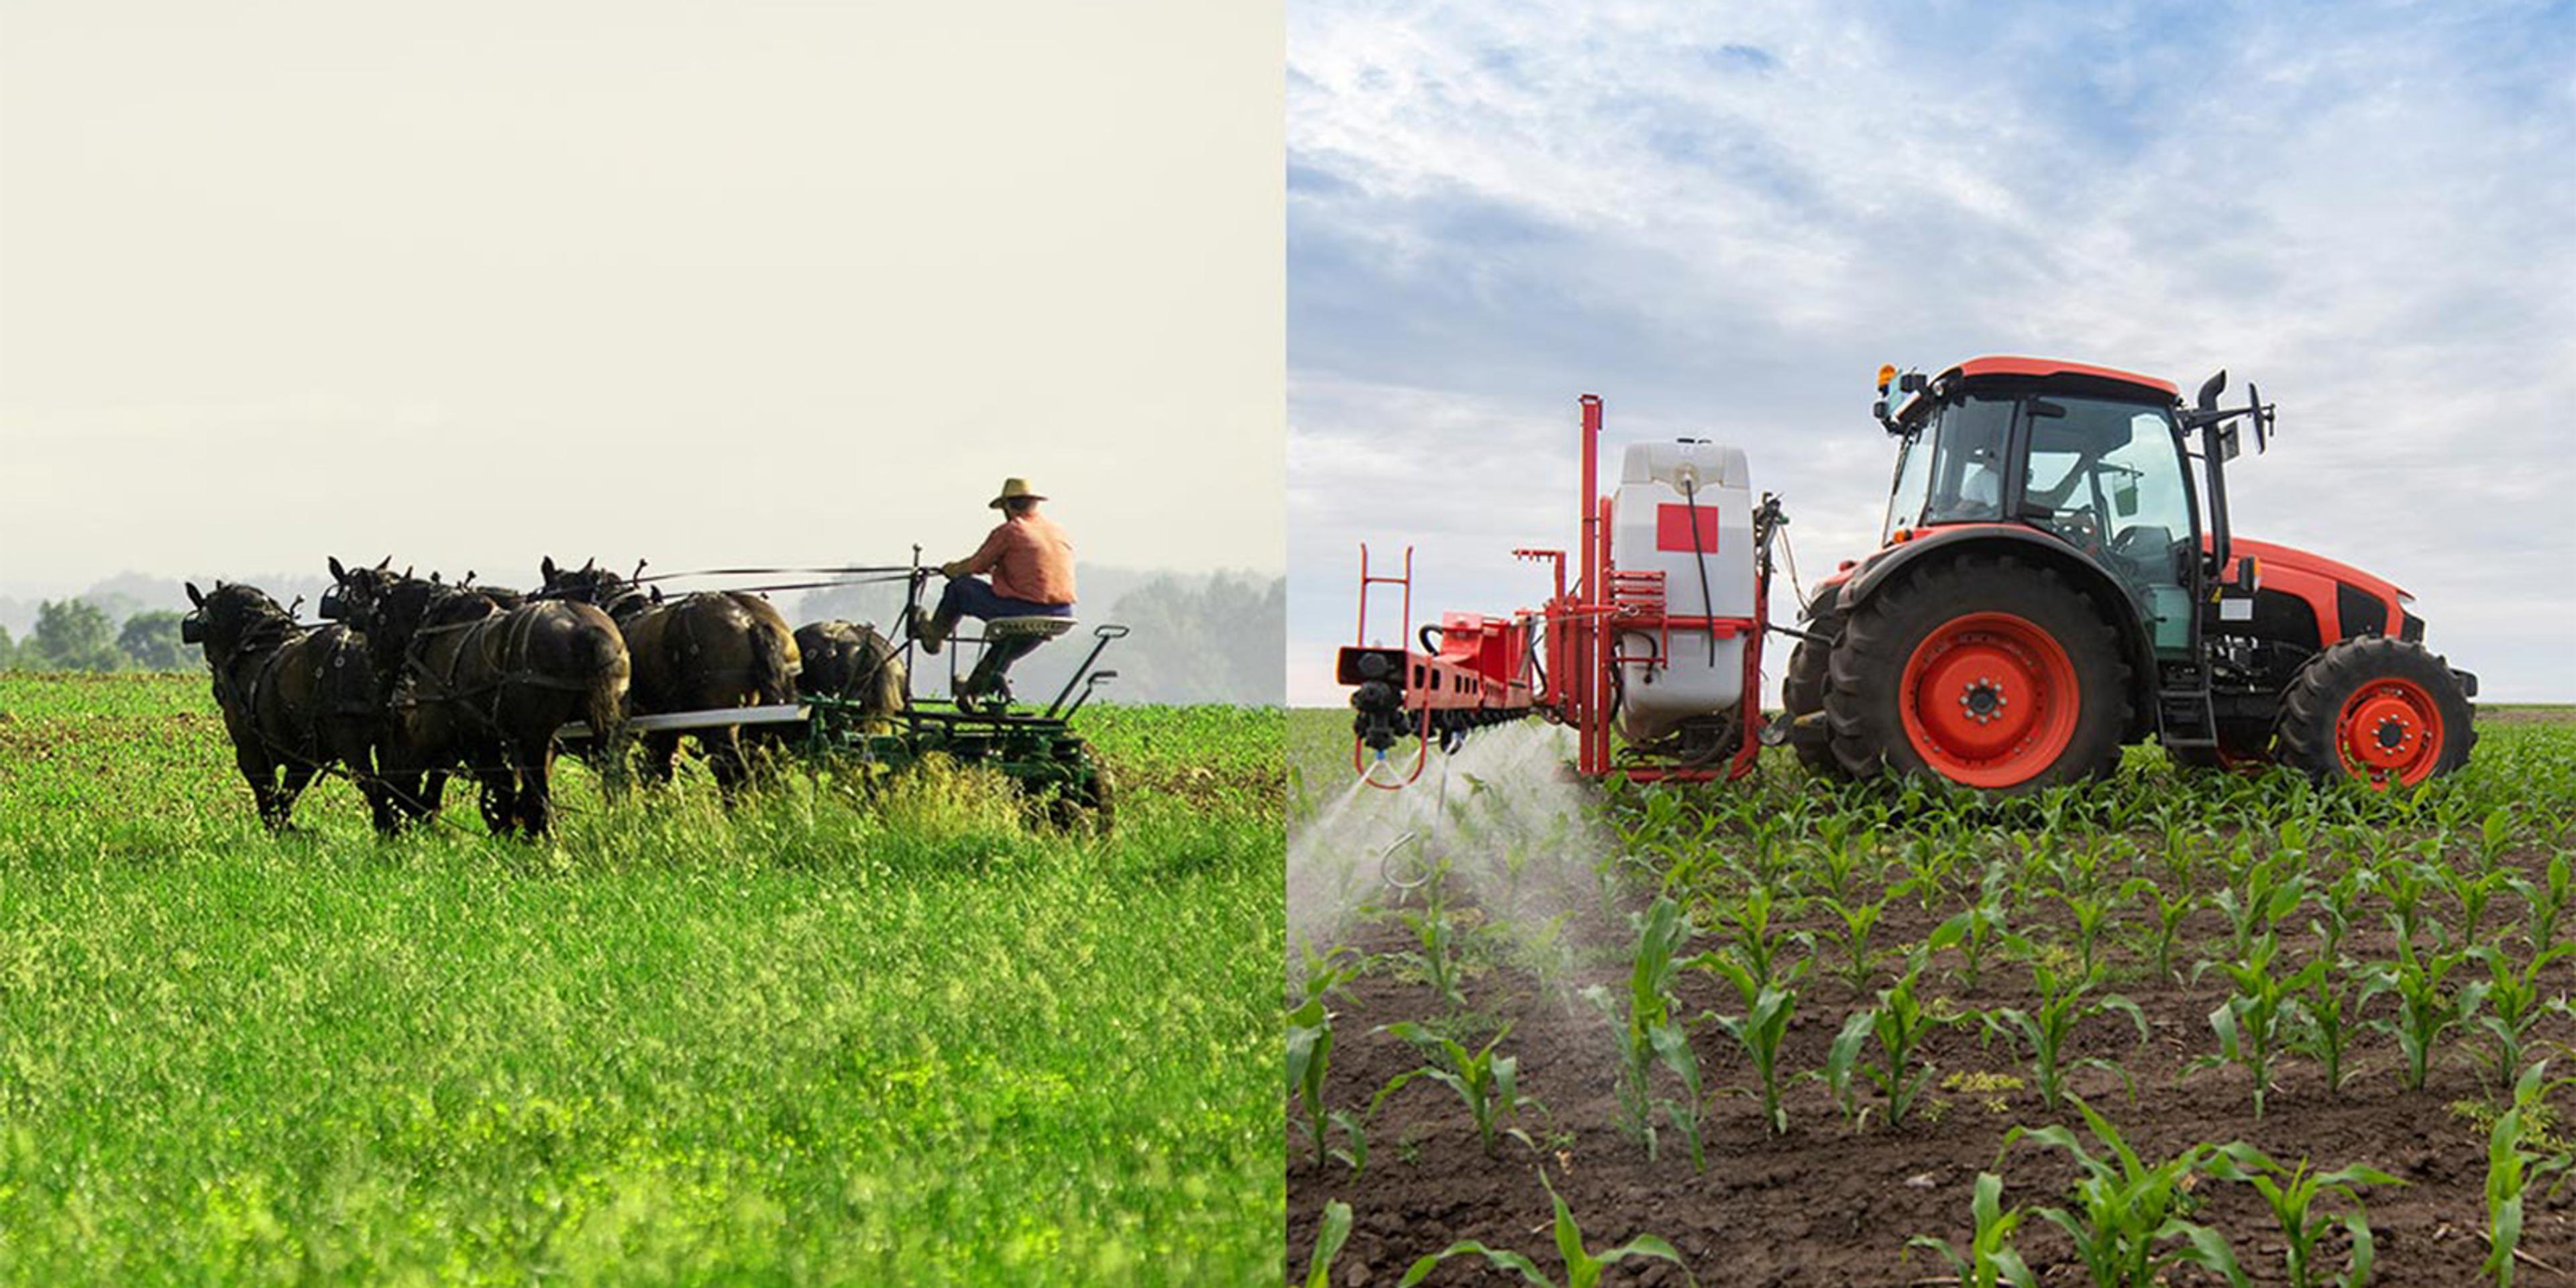 A farmer sits on a planter/cart pulled by horses and an opposing photo shows a tractor with a pesticide sprayer in a corn field.